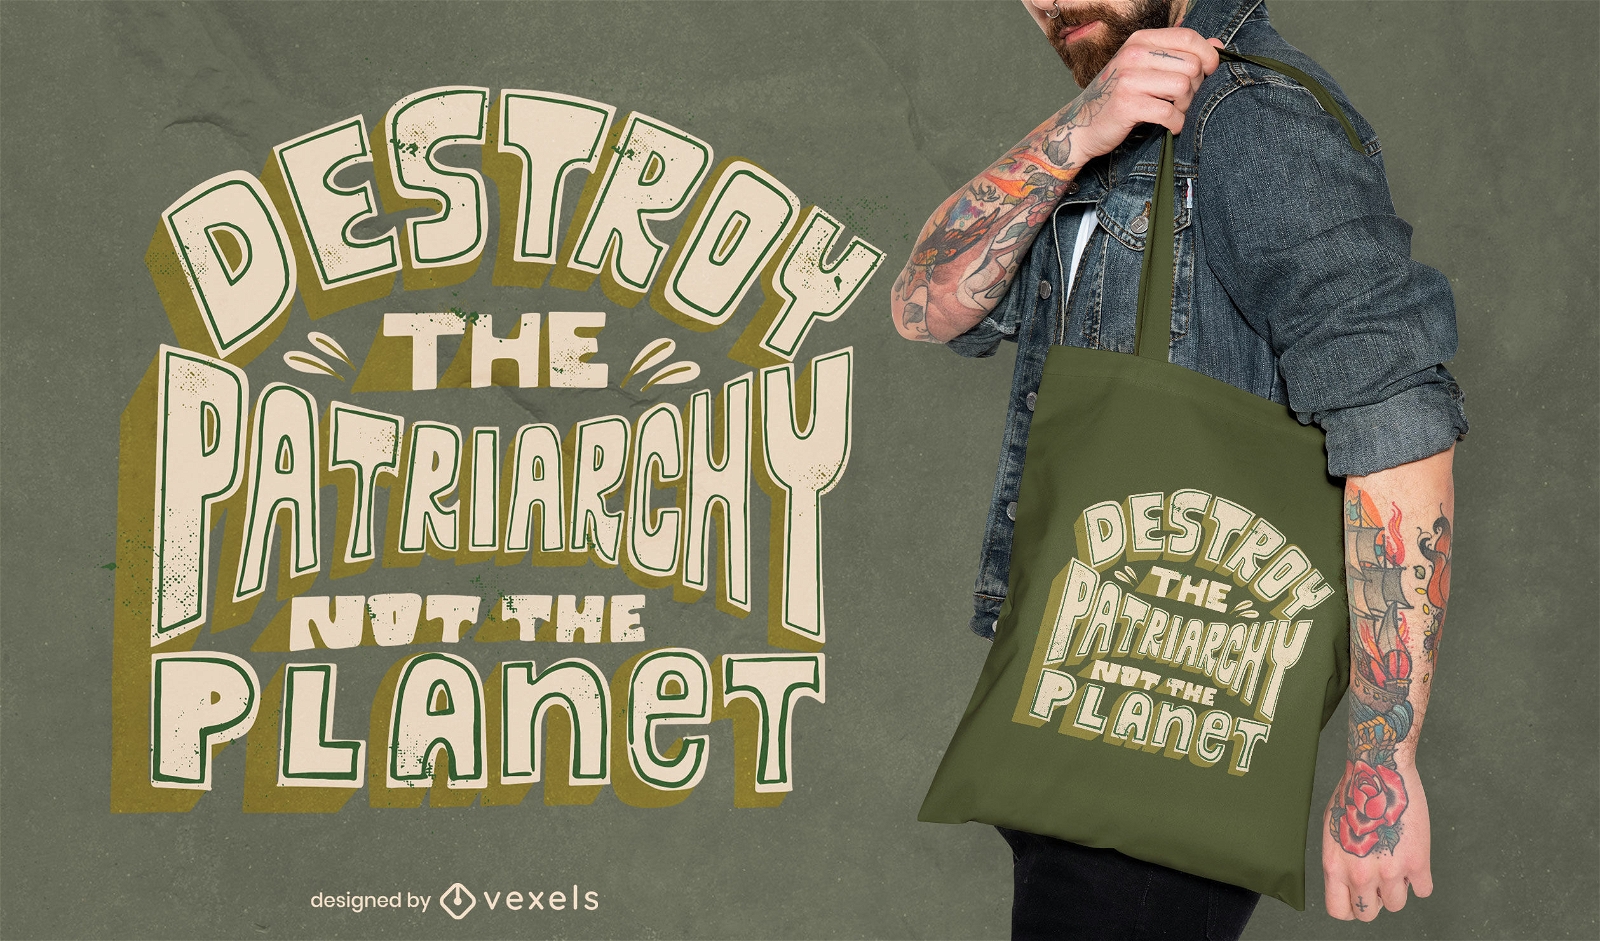 Destroy the patriarchy ecology tote bag design